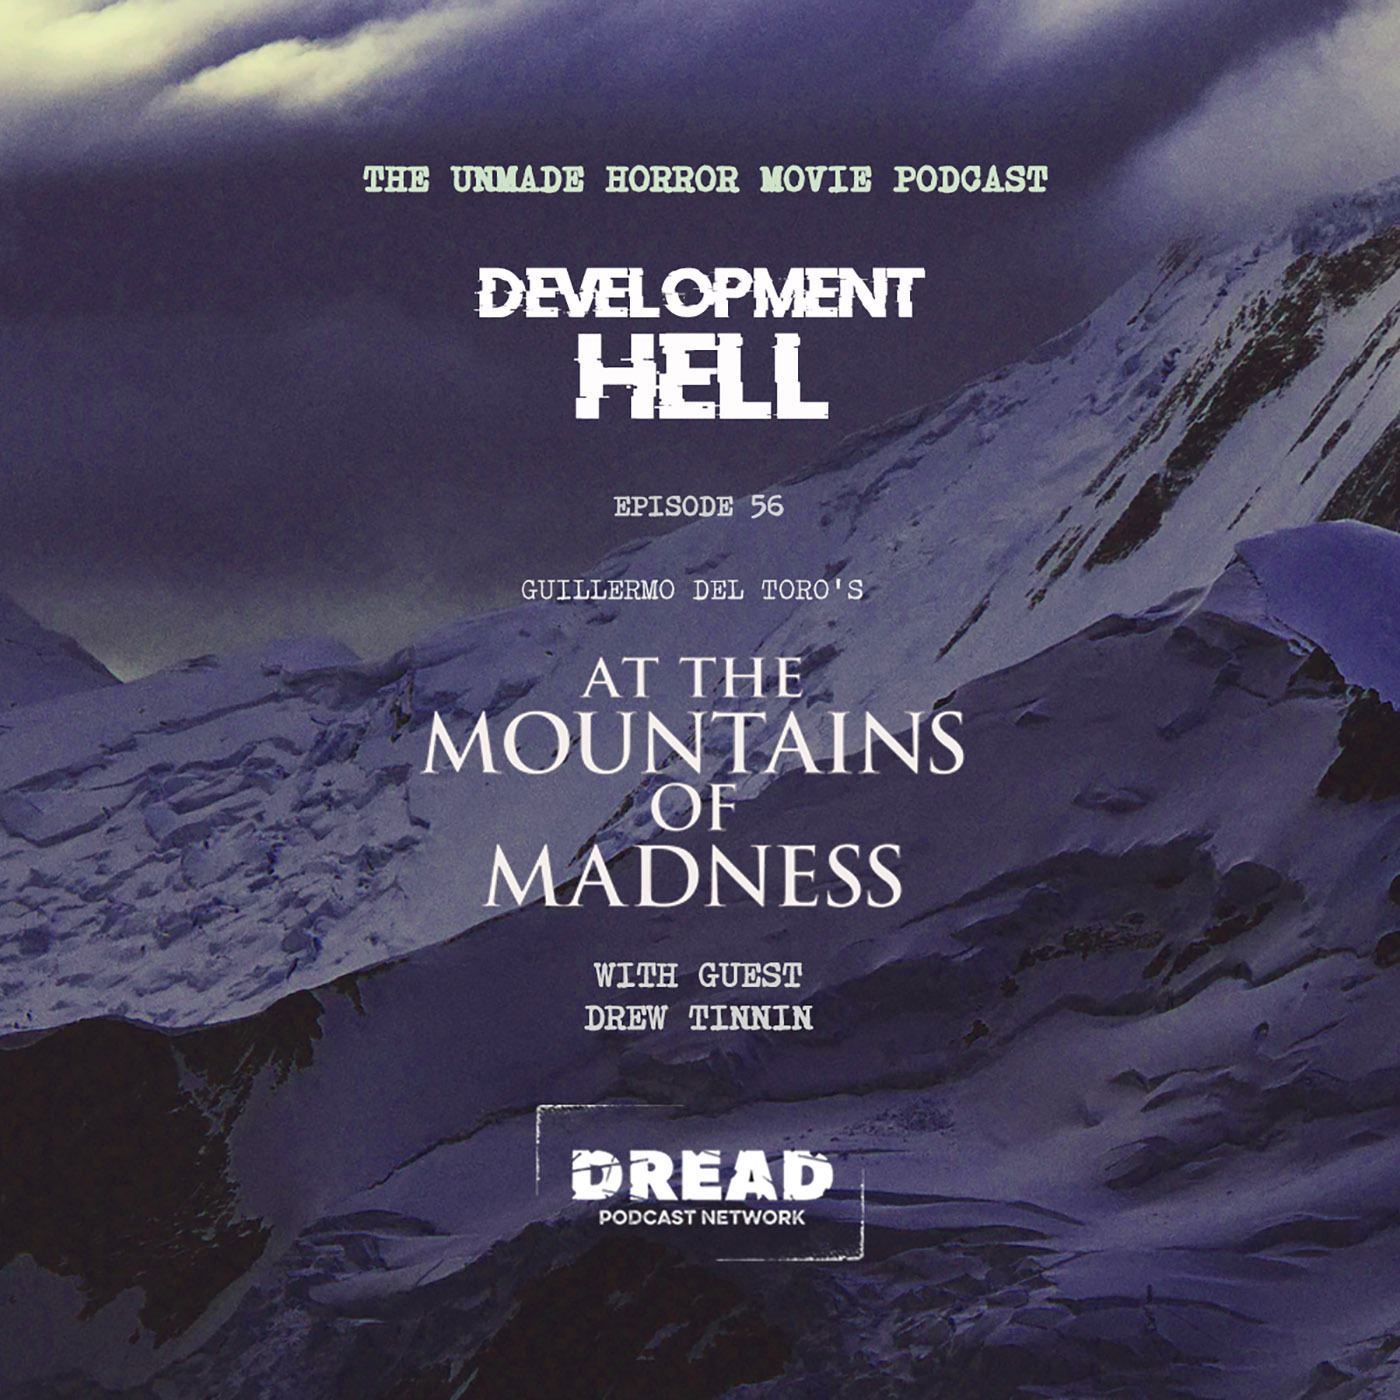 Guillermo del Toro's AT THE MOUNTAINS OF MADNESS (with Drew Tinnin)